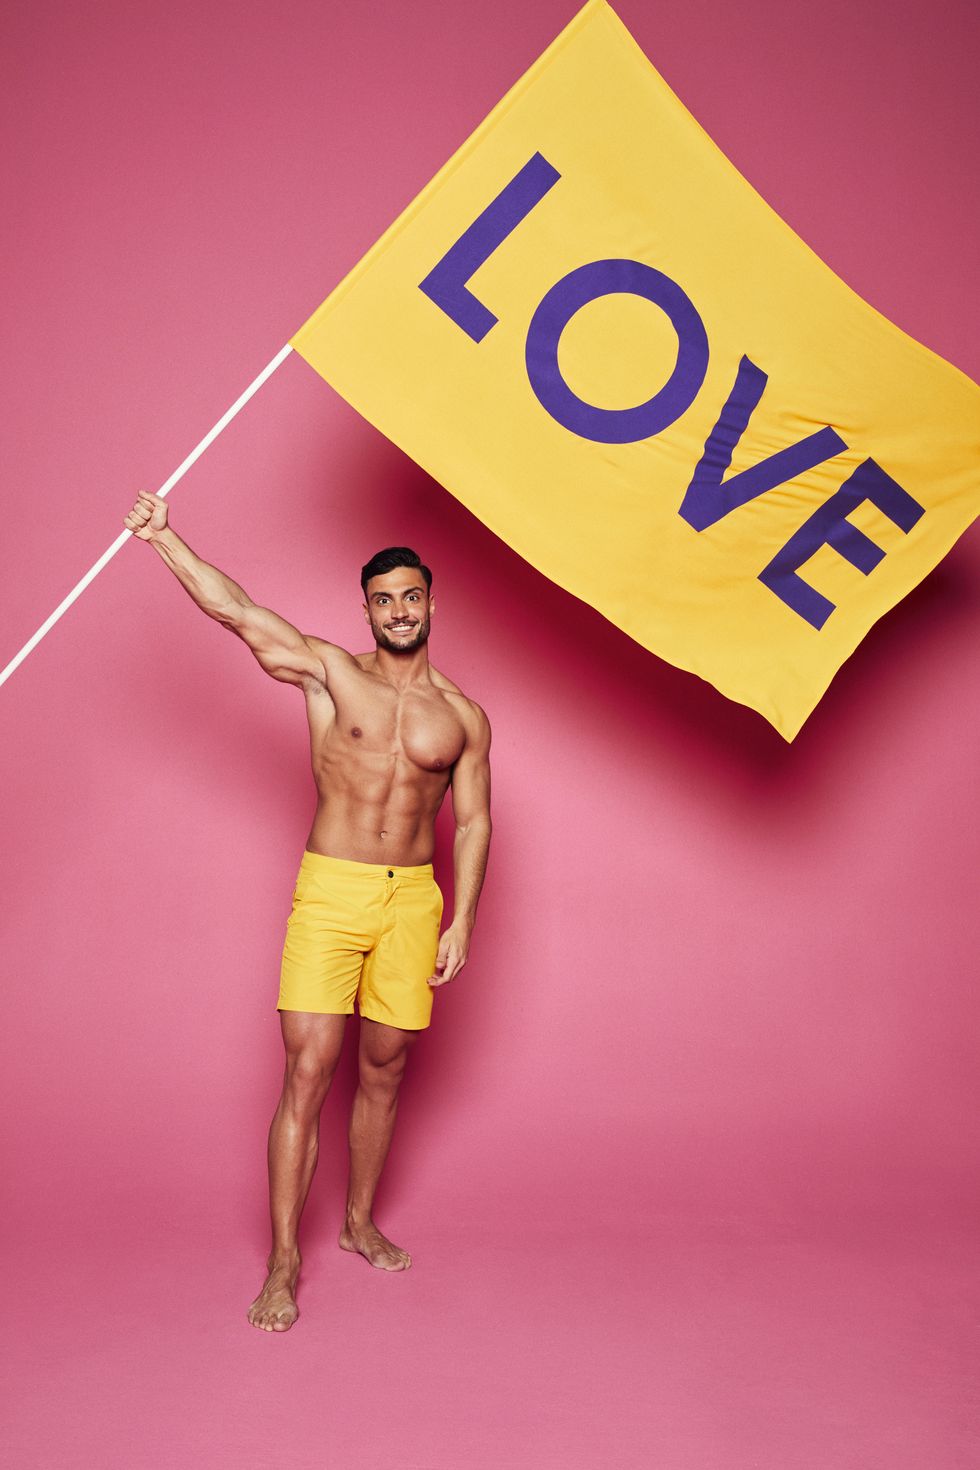 Watch Love Island on ITV@ from abroad without getting blocked !